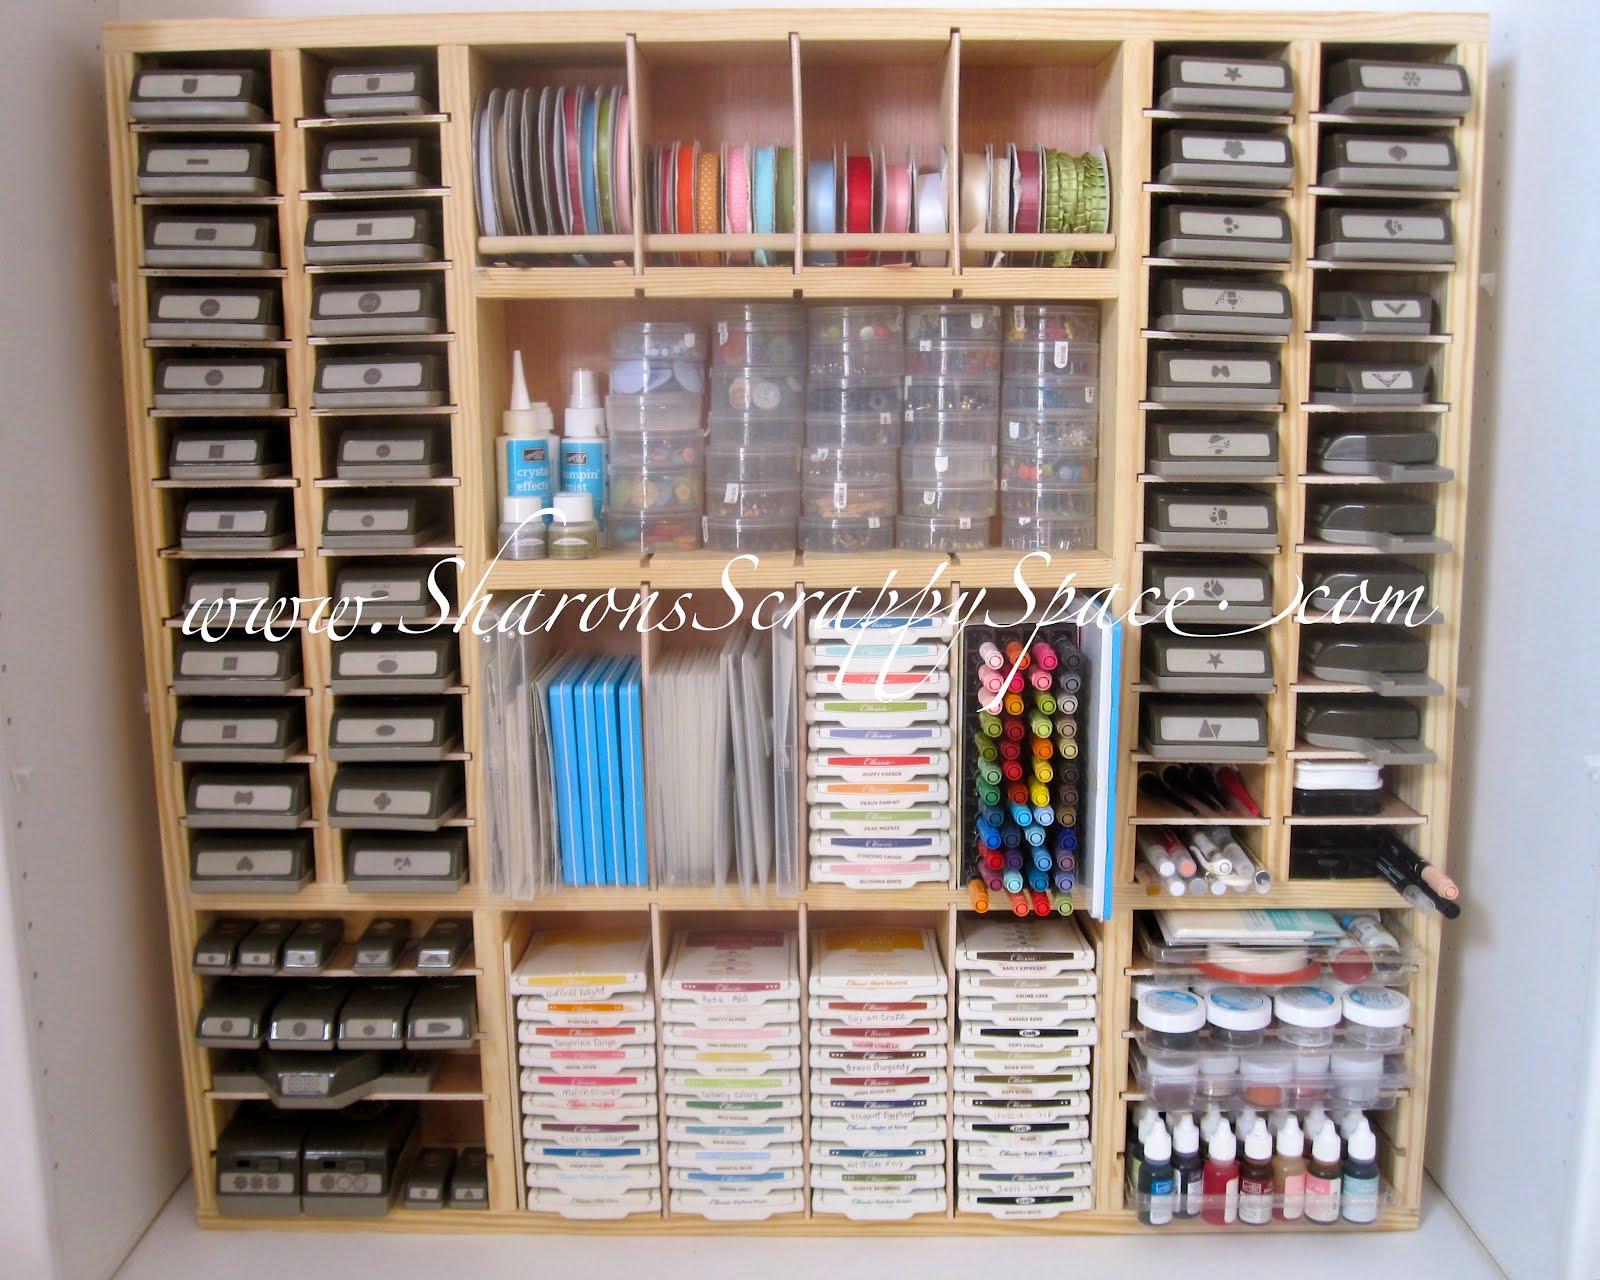 Sharon's Scrappy Space: Ultra Scrapbook Storage Unit Now Available